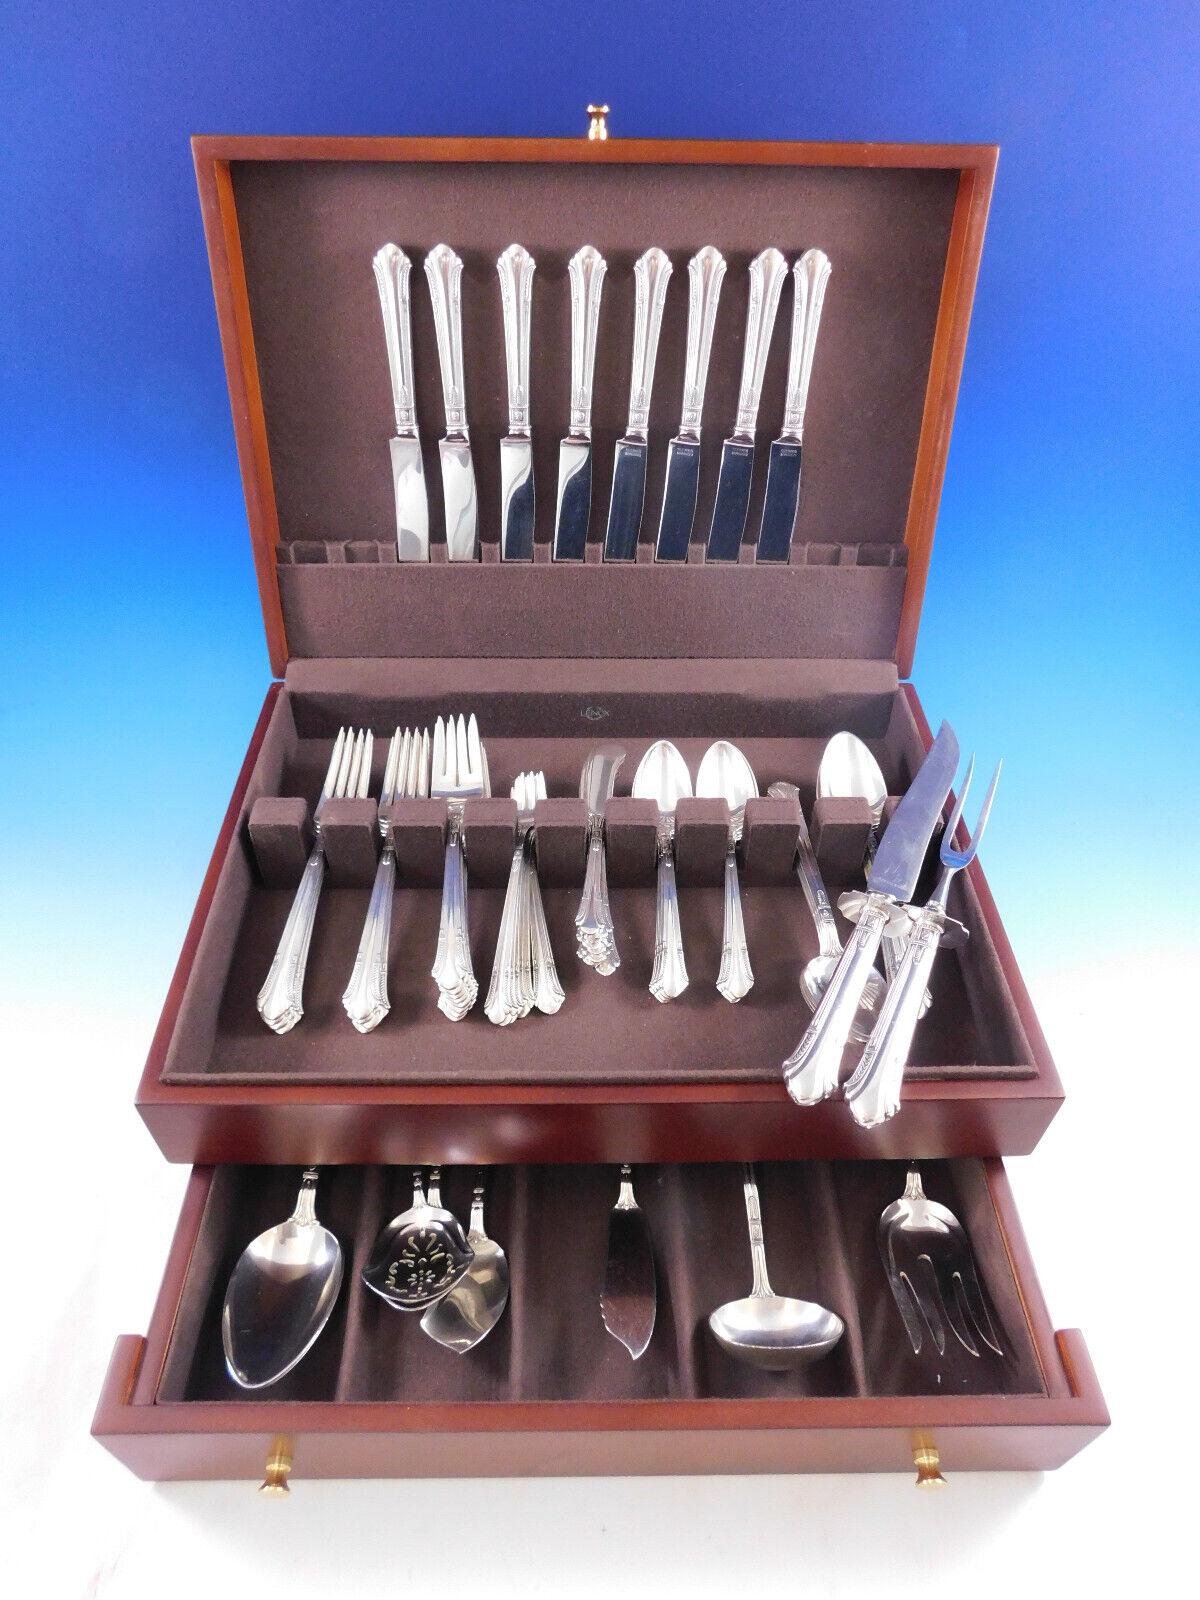 Scarce Art Deco Shamrock V by Gorham sterling silver flatware set - 66 pieces. This pattern was the official pattern of the US Navy and was used on battleships by the high ranking officers and captain. Later, many officers requested this pattern for